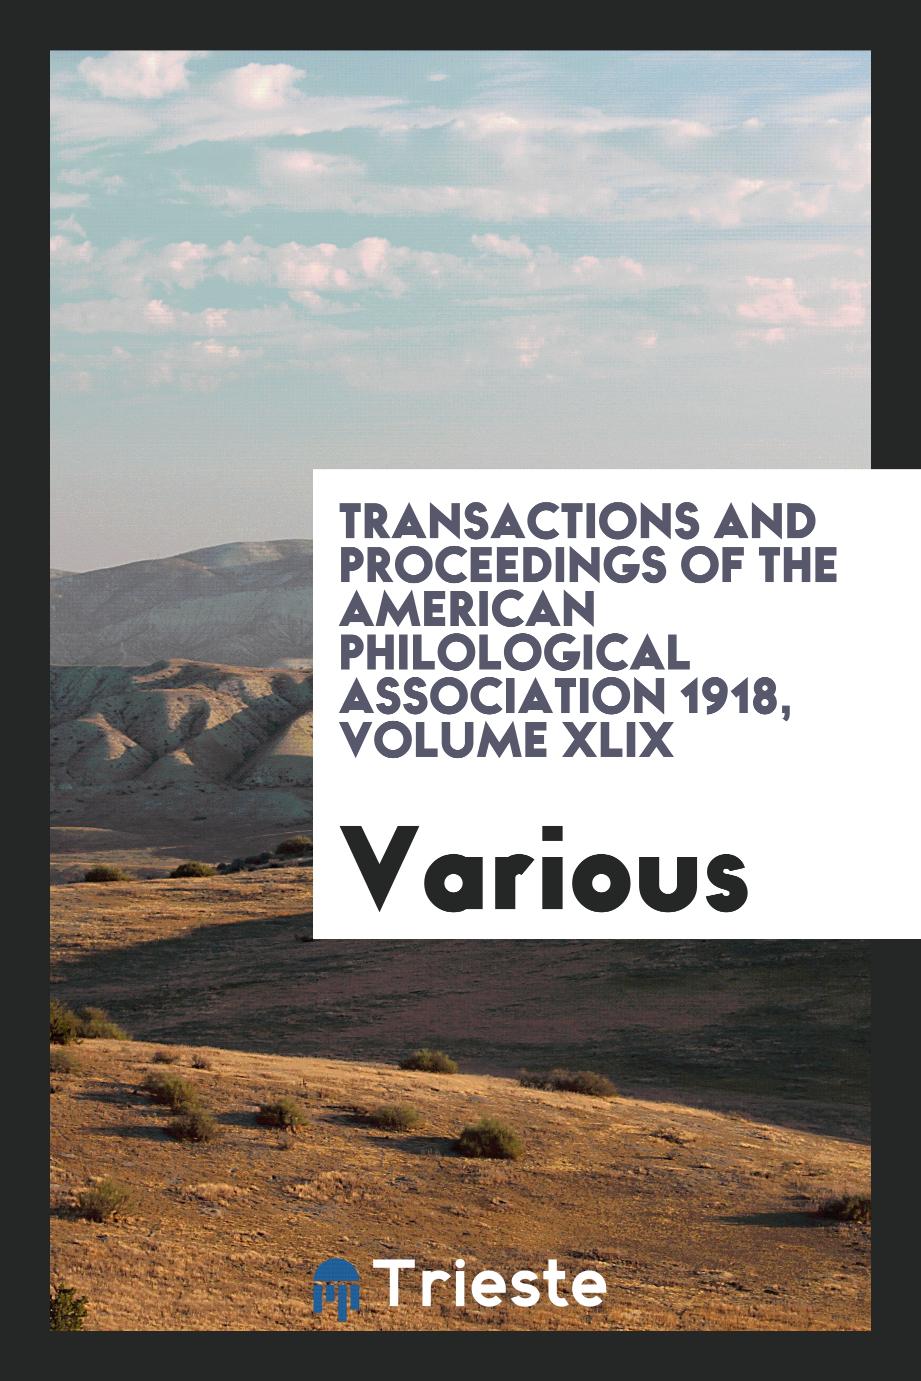 Transactions and proceedings of the American Philological Association 1918, Volume XLIX